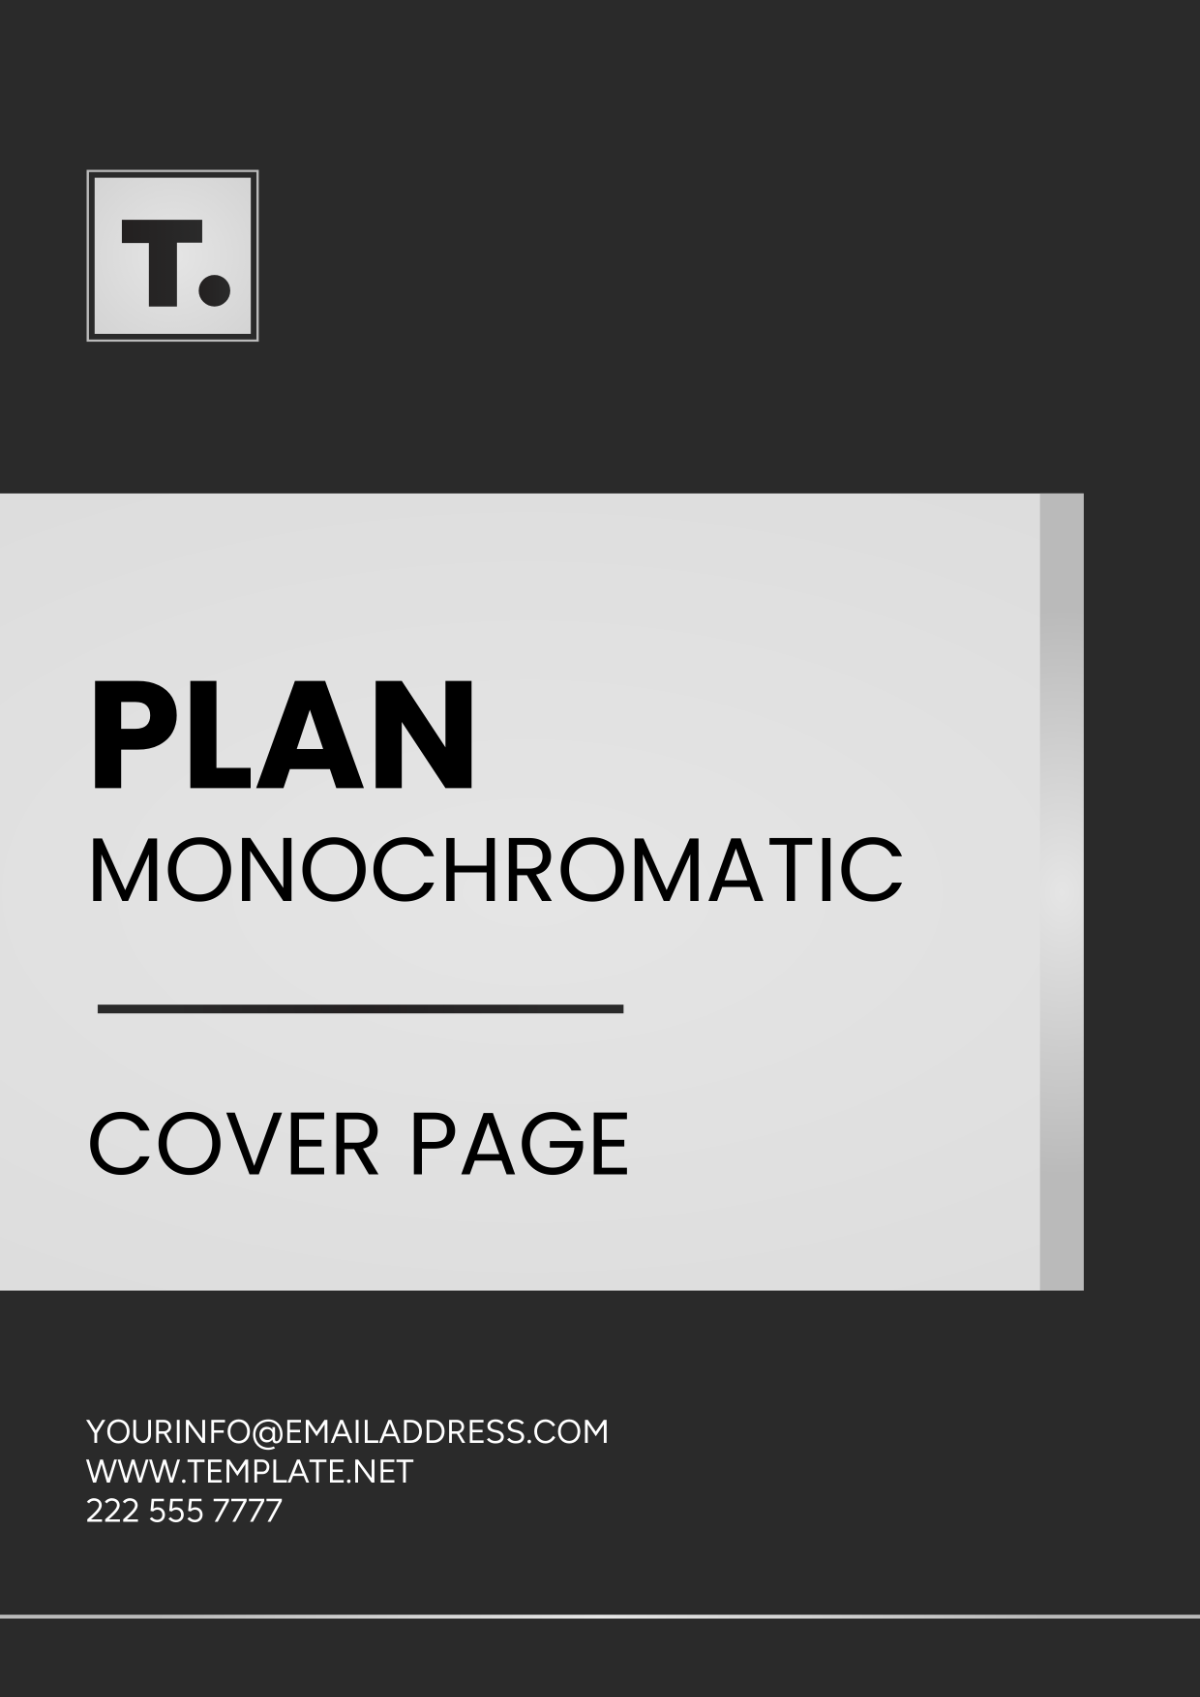 Free Plan Monochromatic Cover Page Template